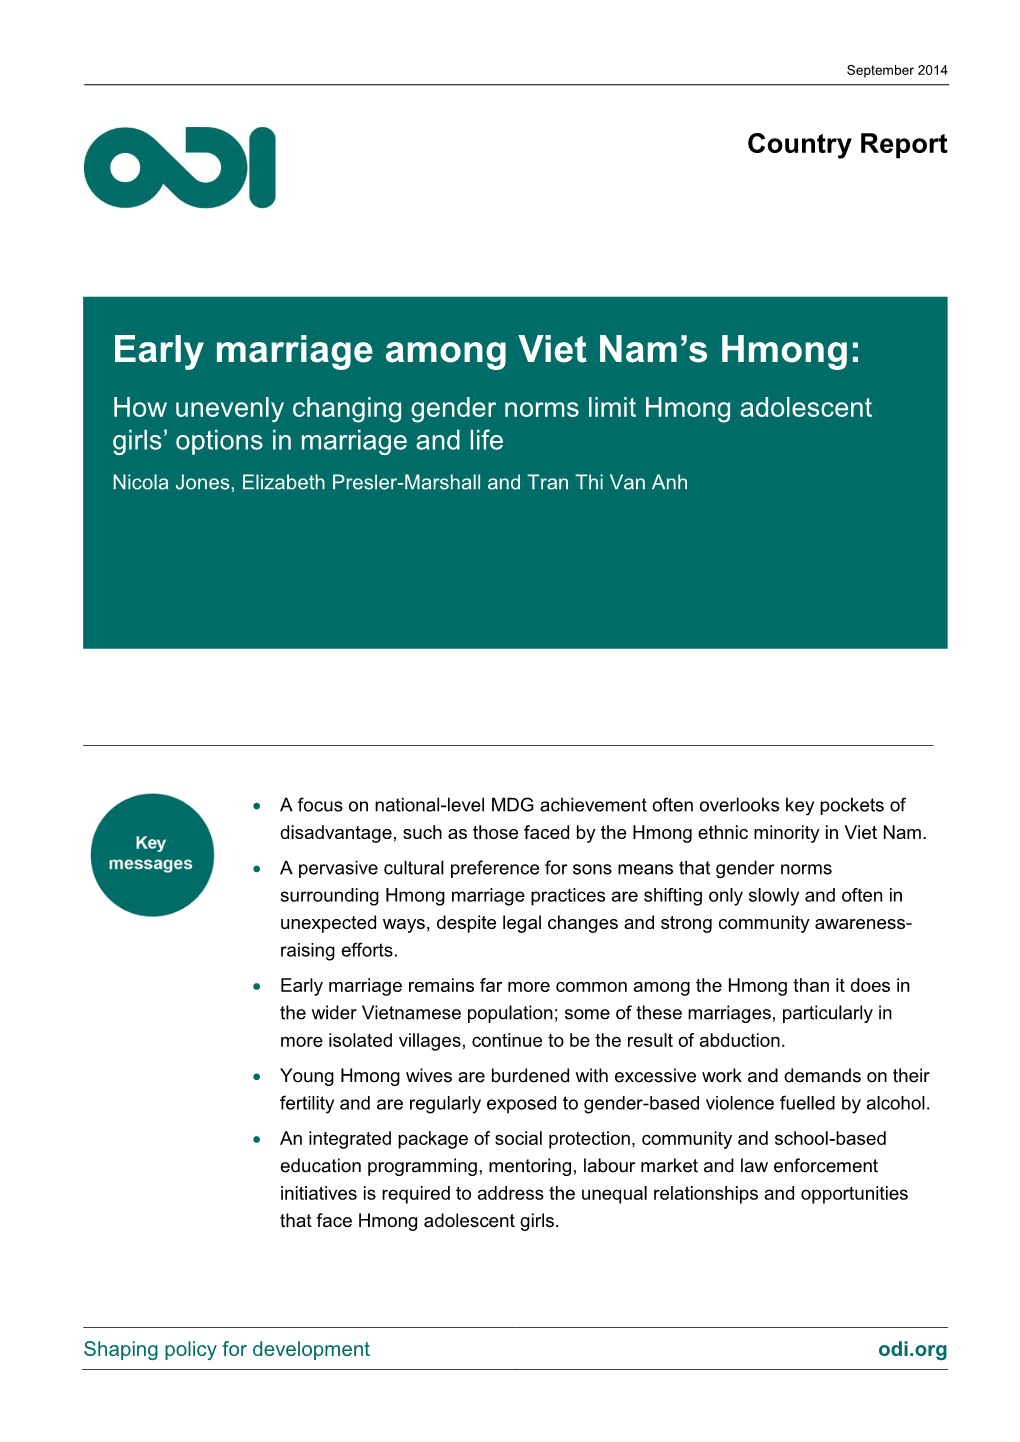 Early Marriage Among Viet Nam's Hmong